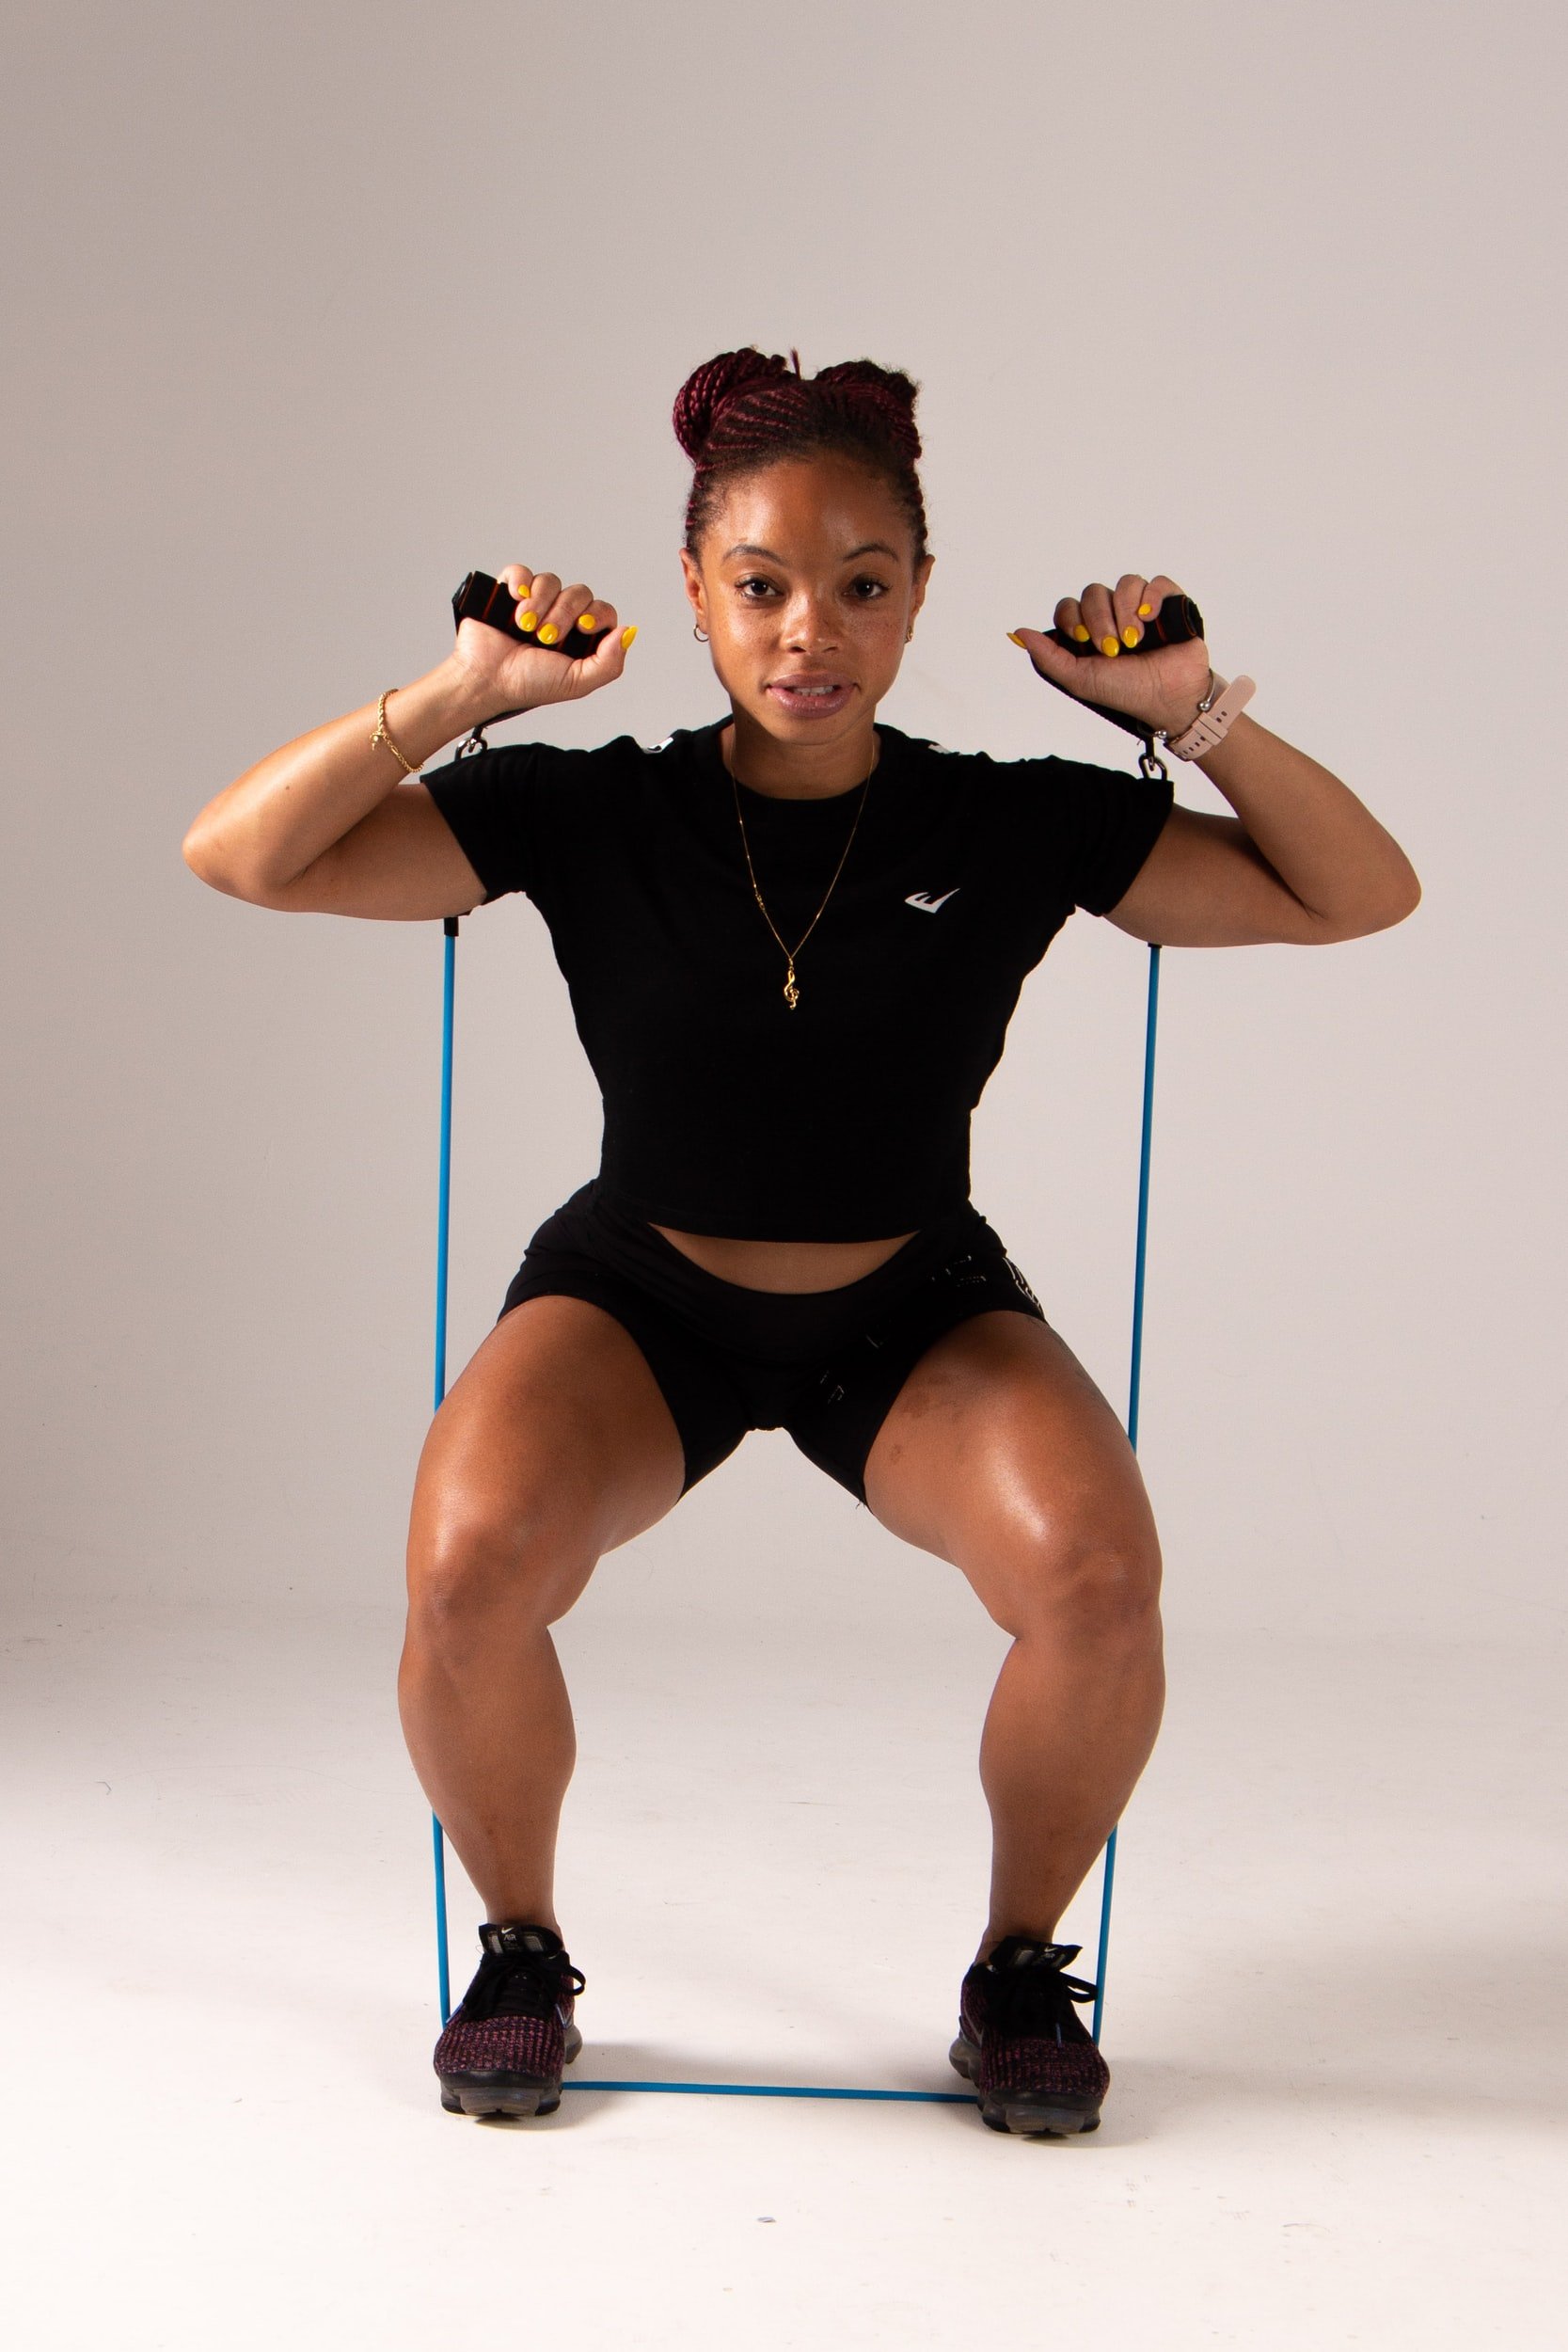 Finding The Best Squat Stance — Personal Fitness Trainers in San Francisco